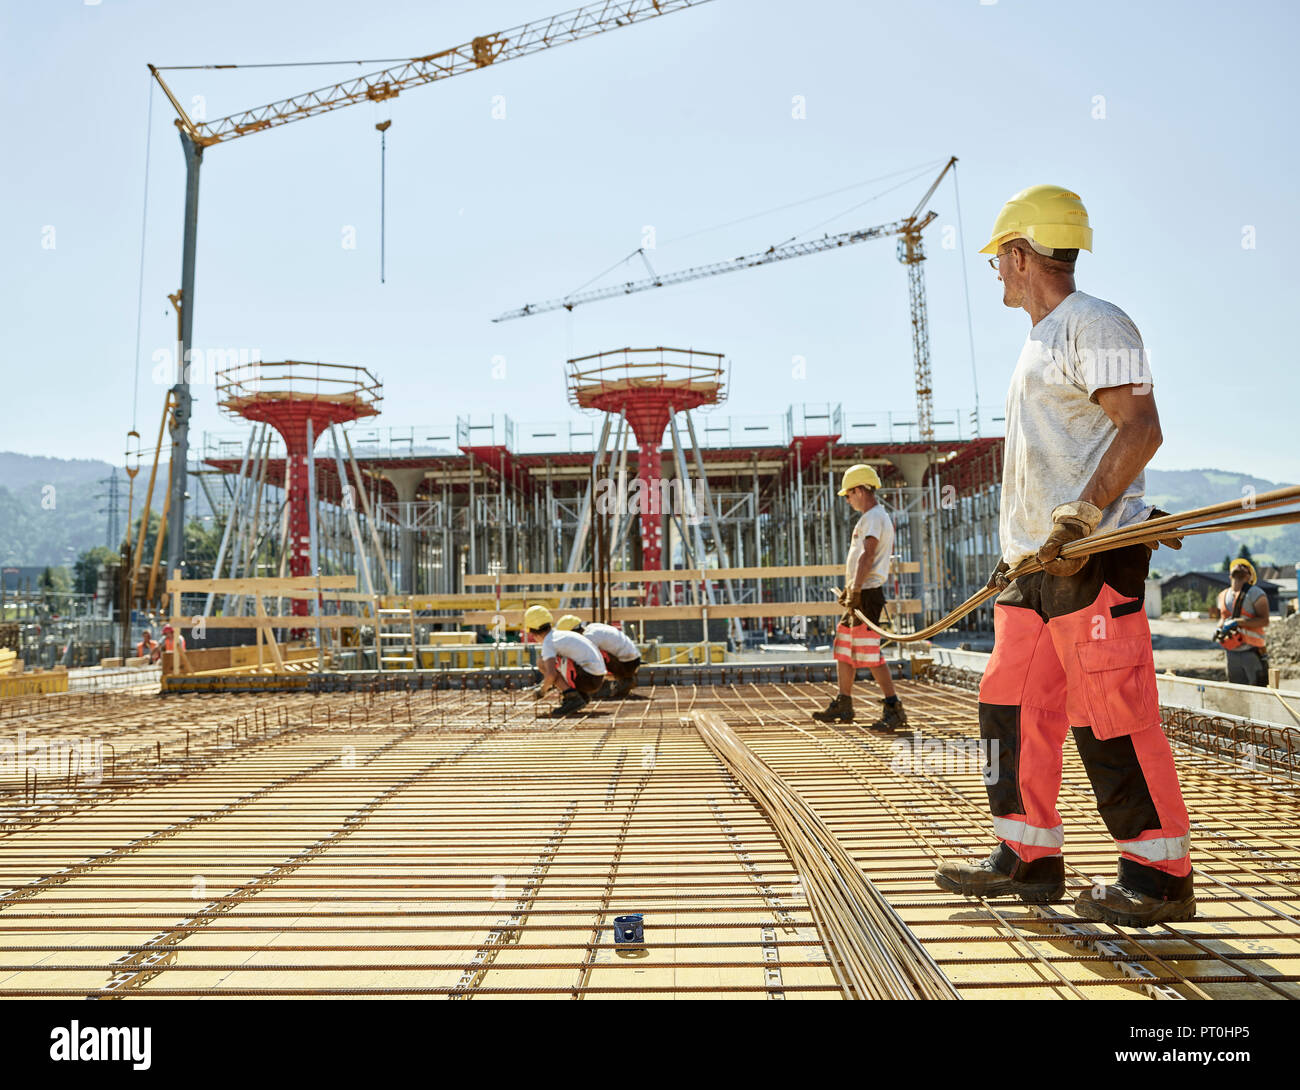 Workers on construction site preparing iron rods Stock Photo